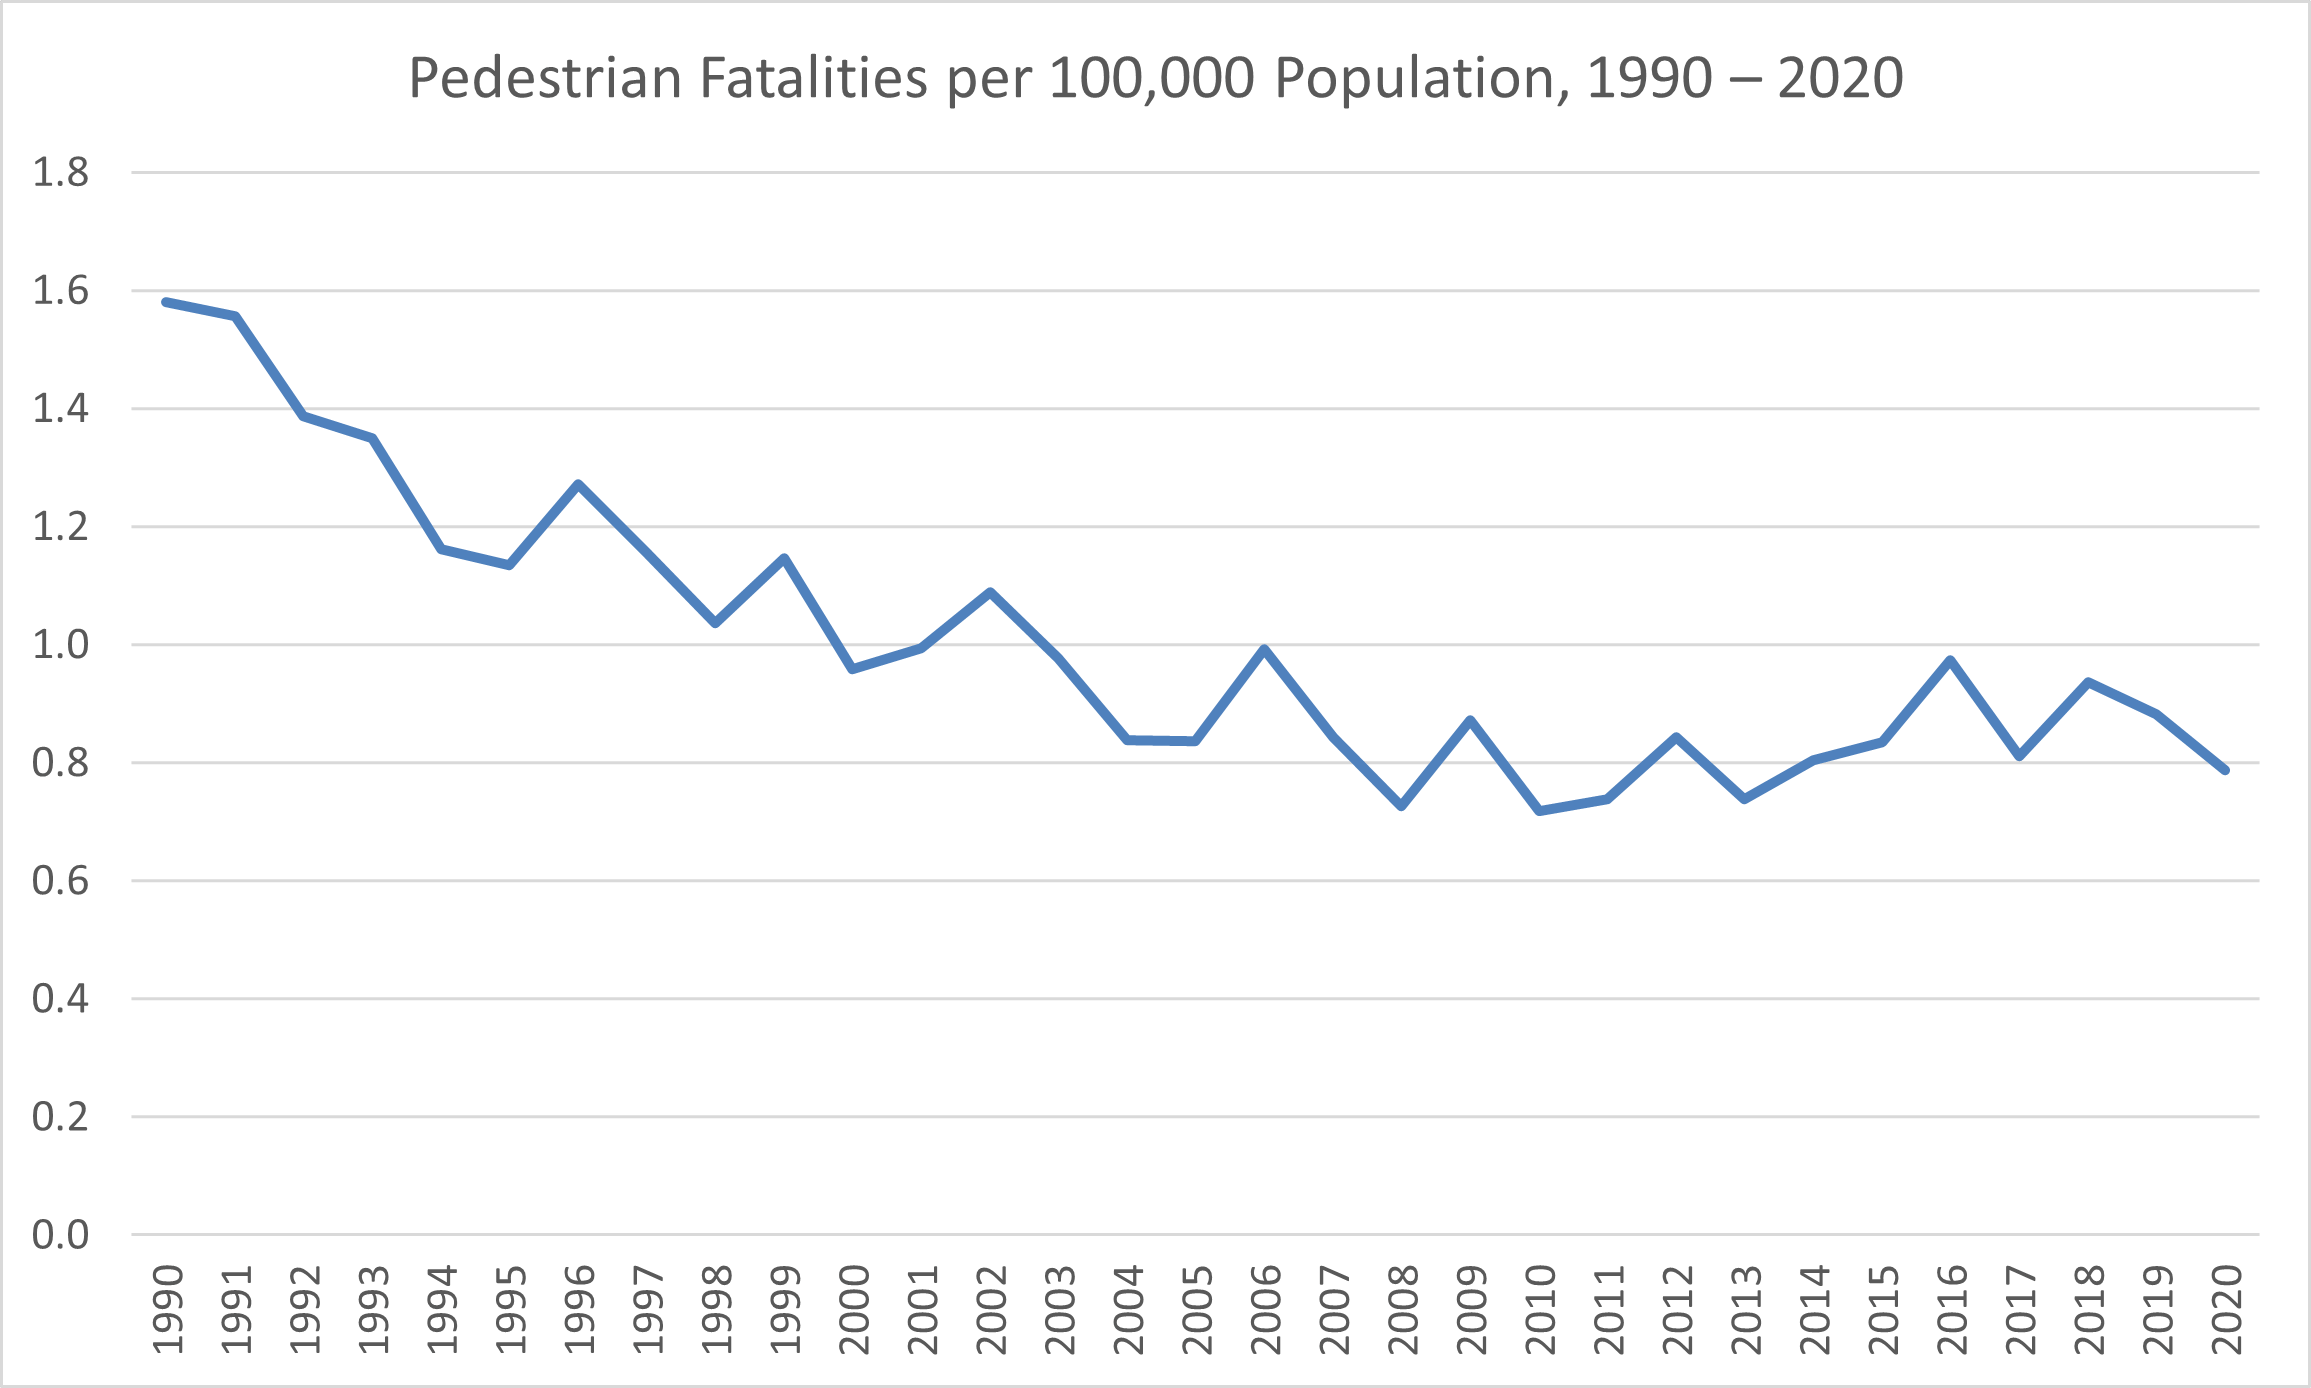 Pedestrian fatality rates 1990 to 2020